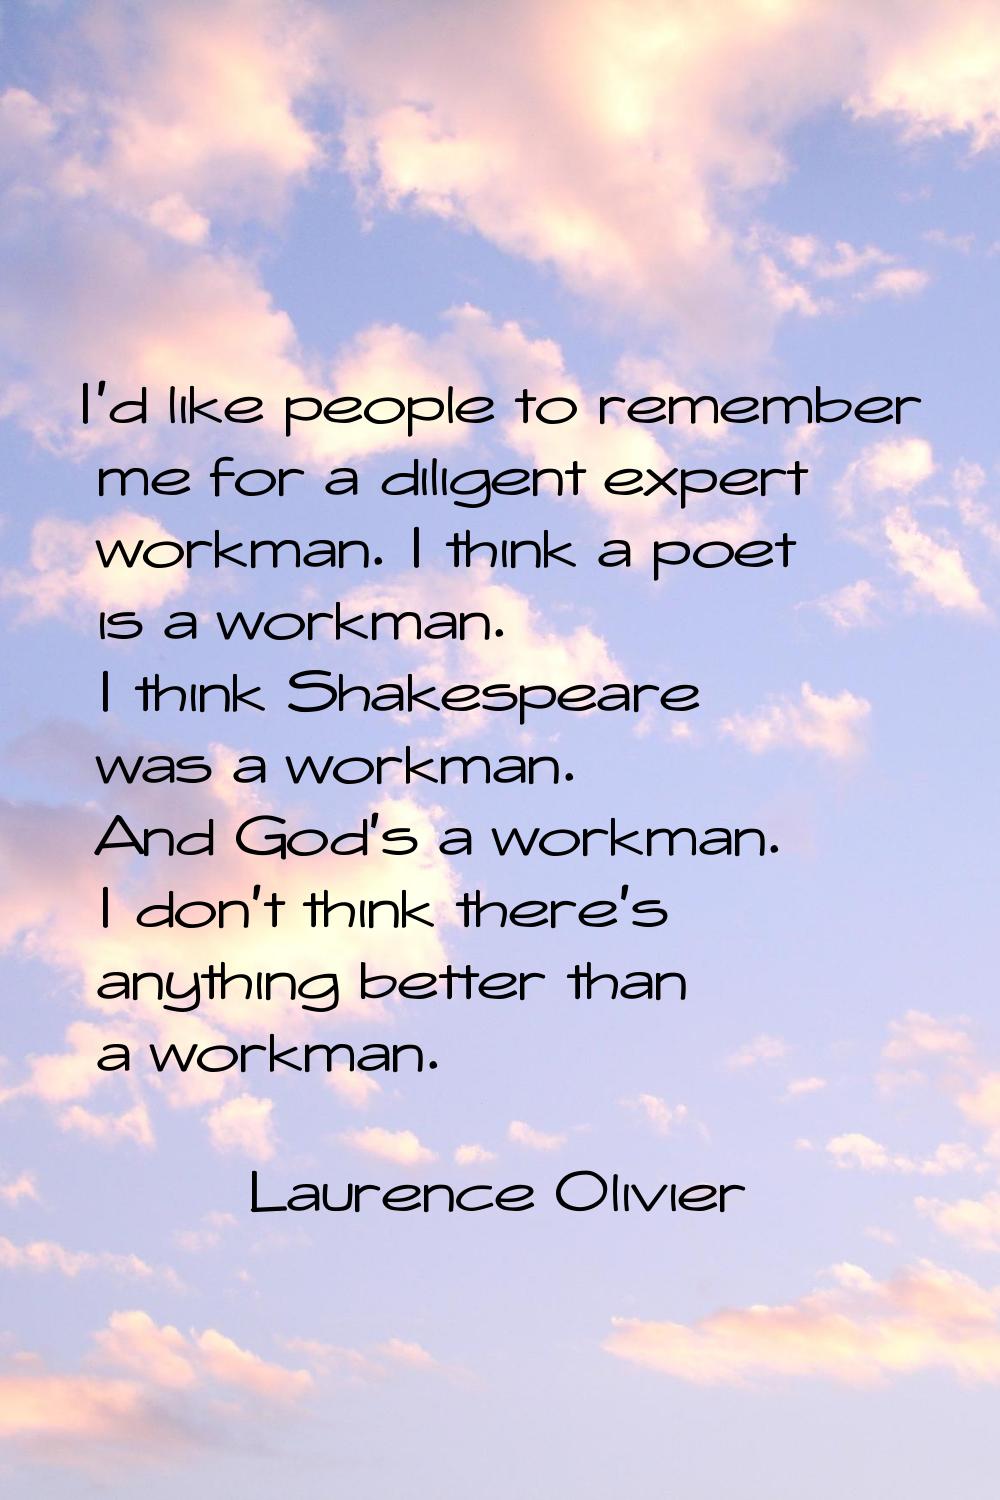 I'd like people to remember me for a diligent expert workman. I think a poet is a workman. I think 